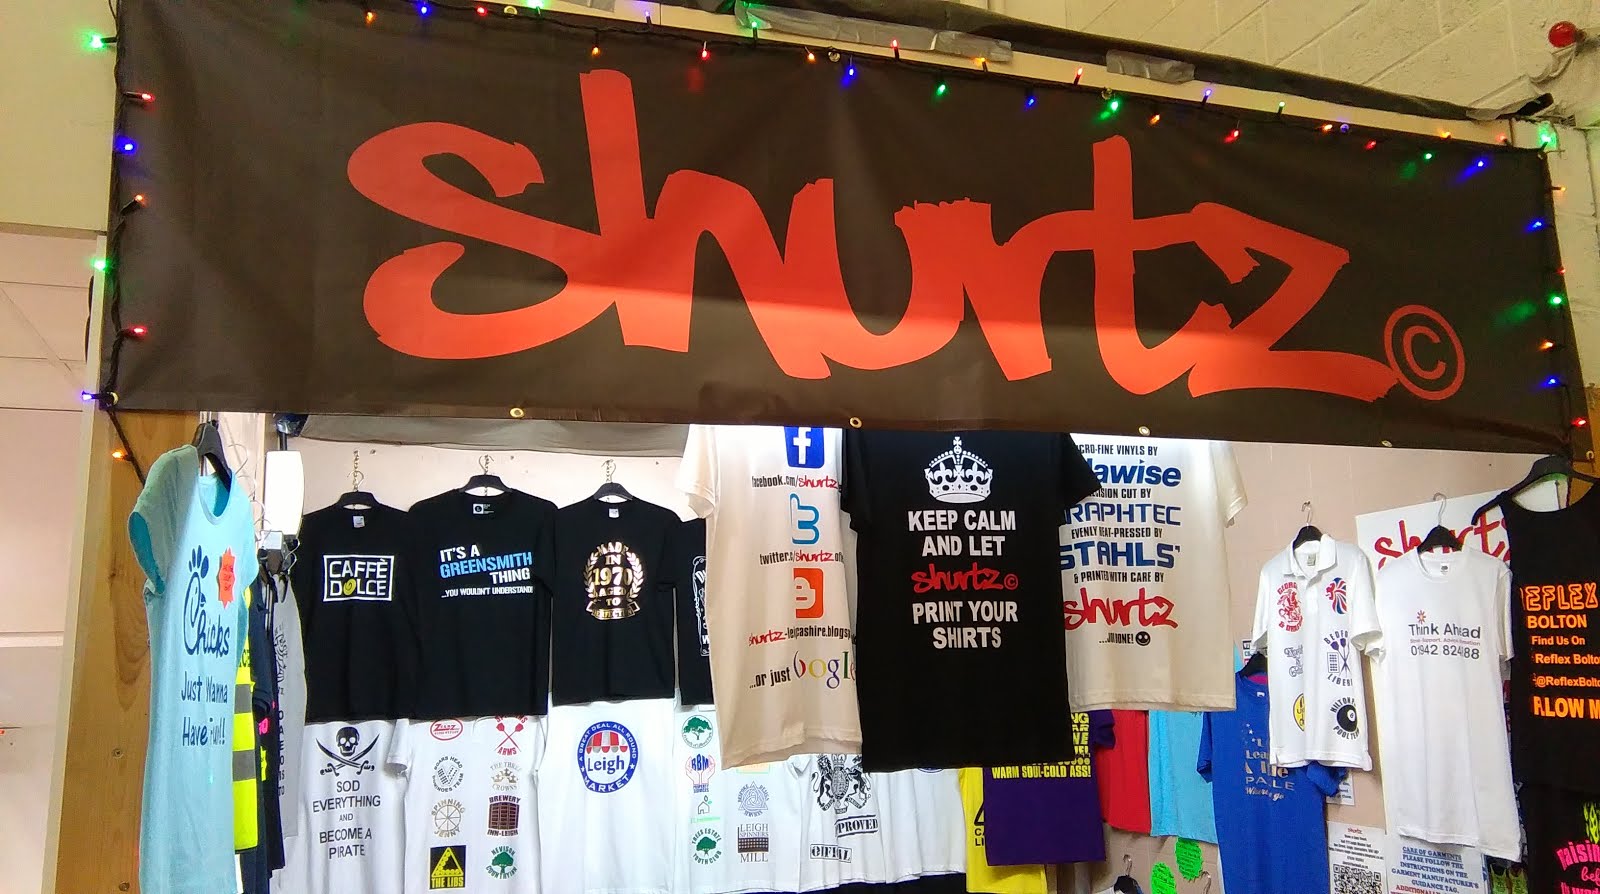 The Shurtz Stall July 2015